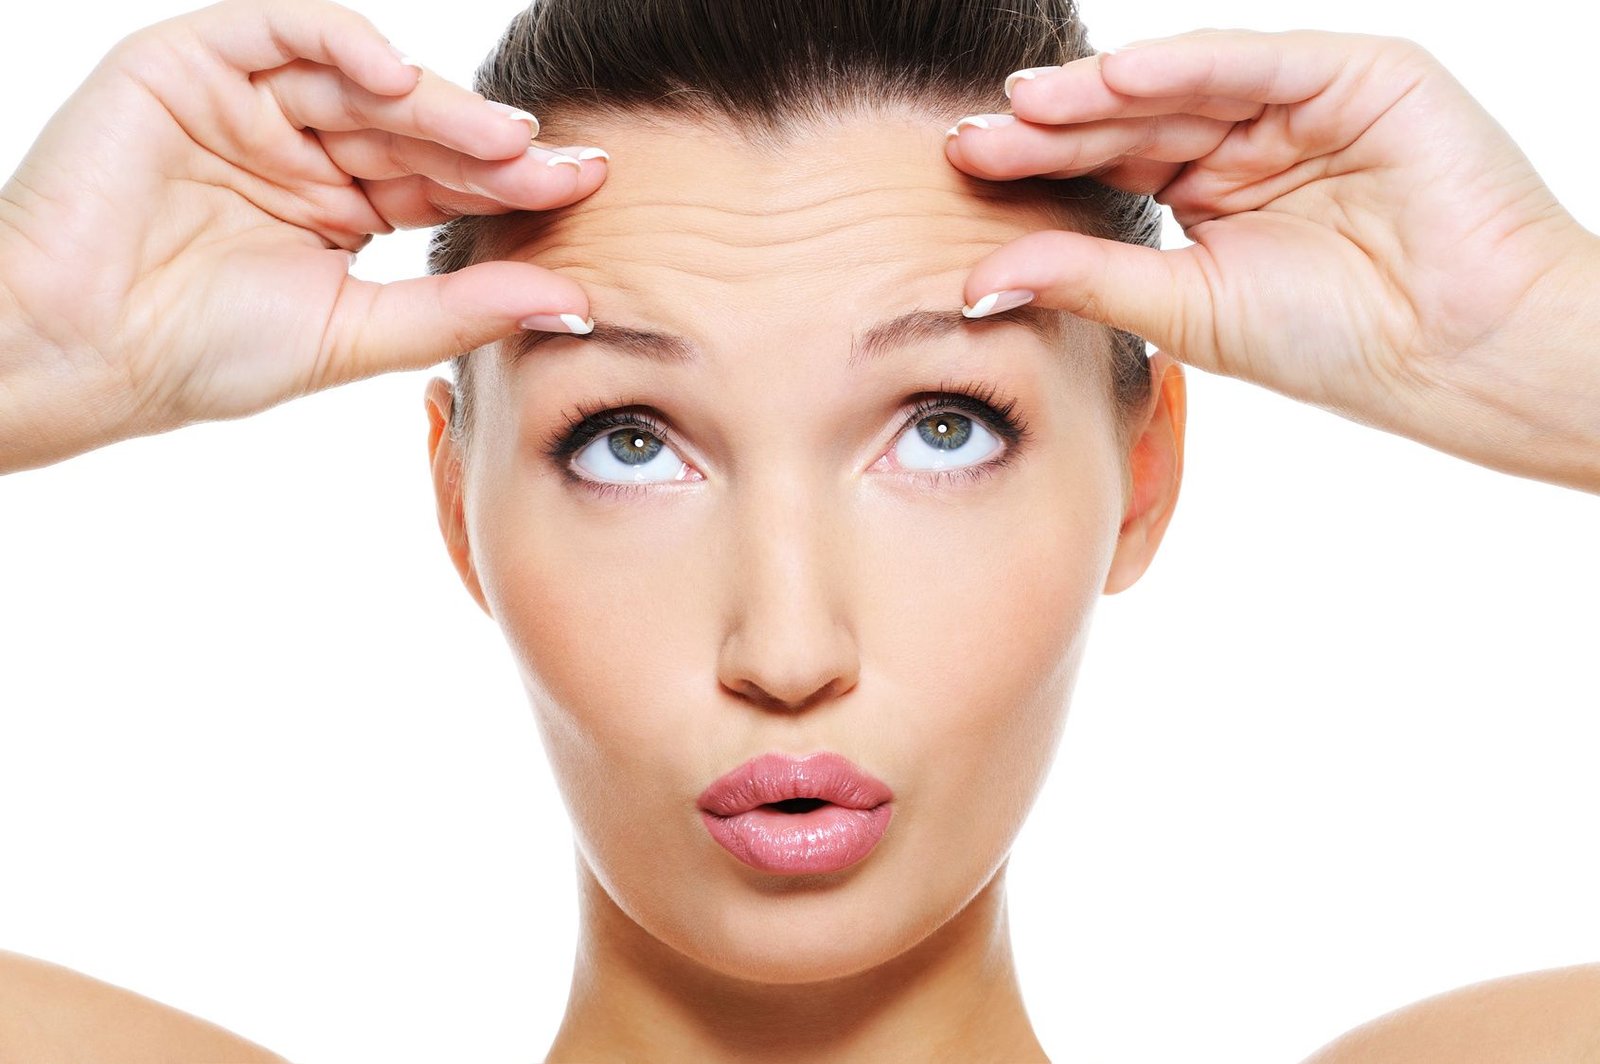 how to reduce wrinkles on face naturally